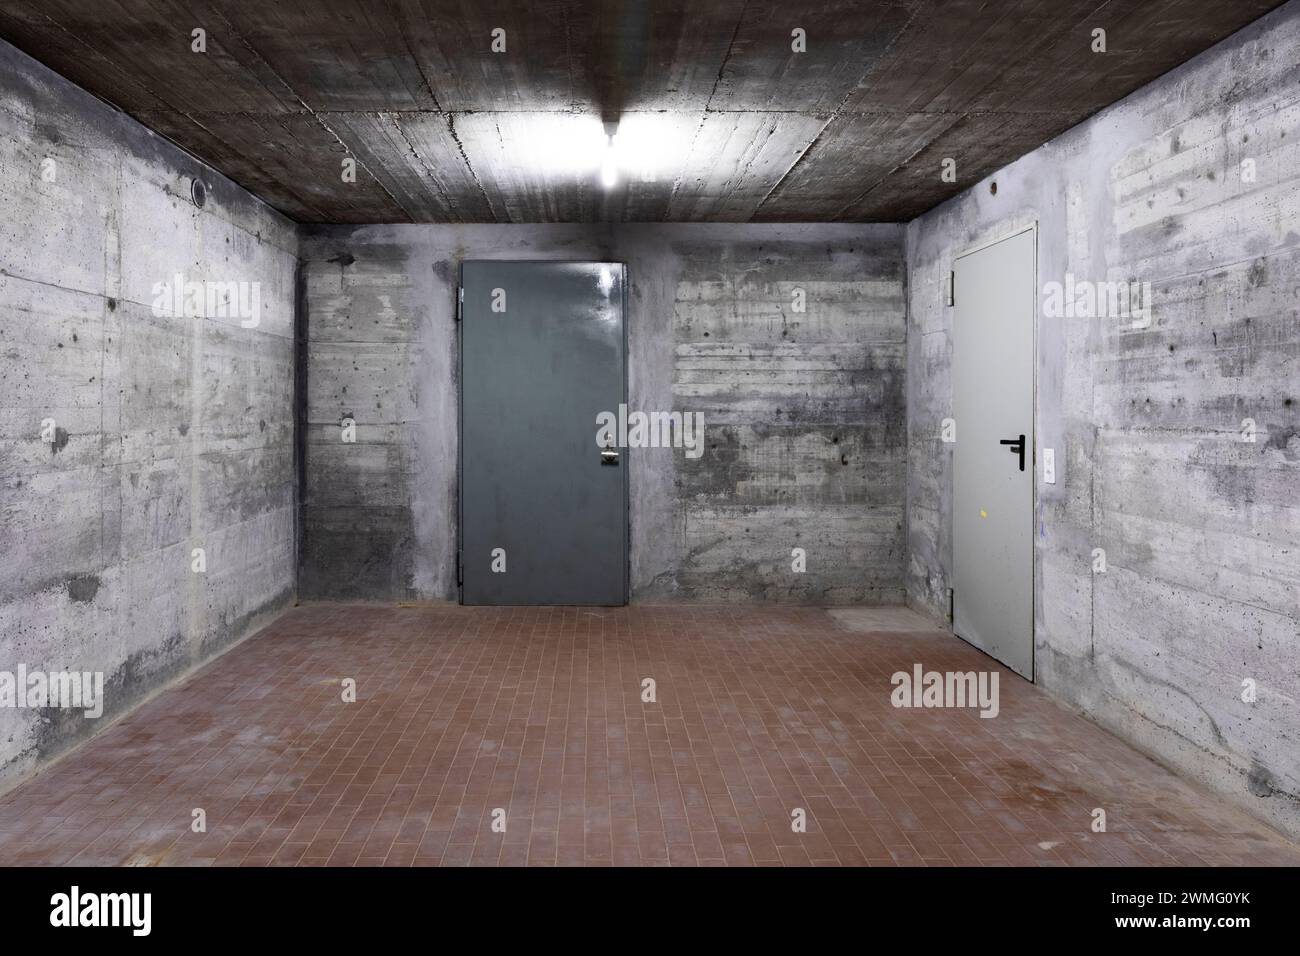 Front view of reinforced concrete wall of a bunker with closed armored door. Scene illuminated by a white neon lamp. Nobody inside Stock Photo